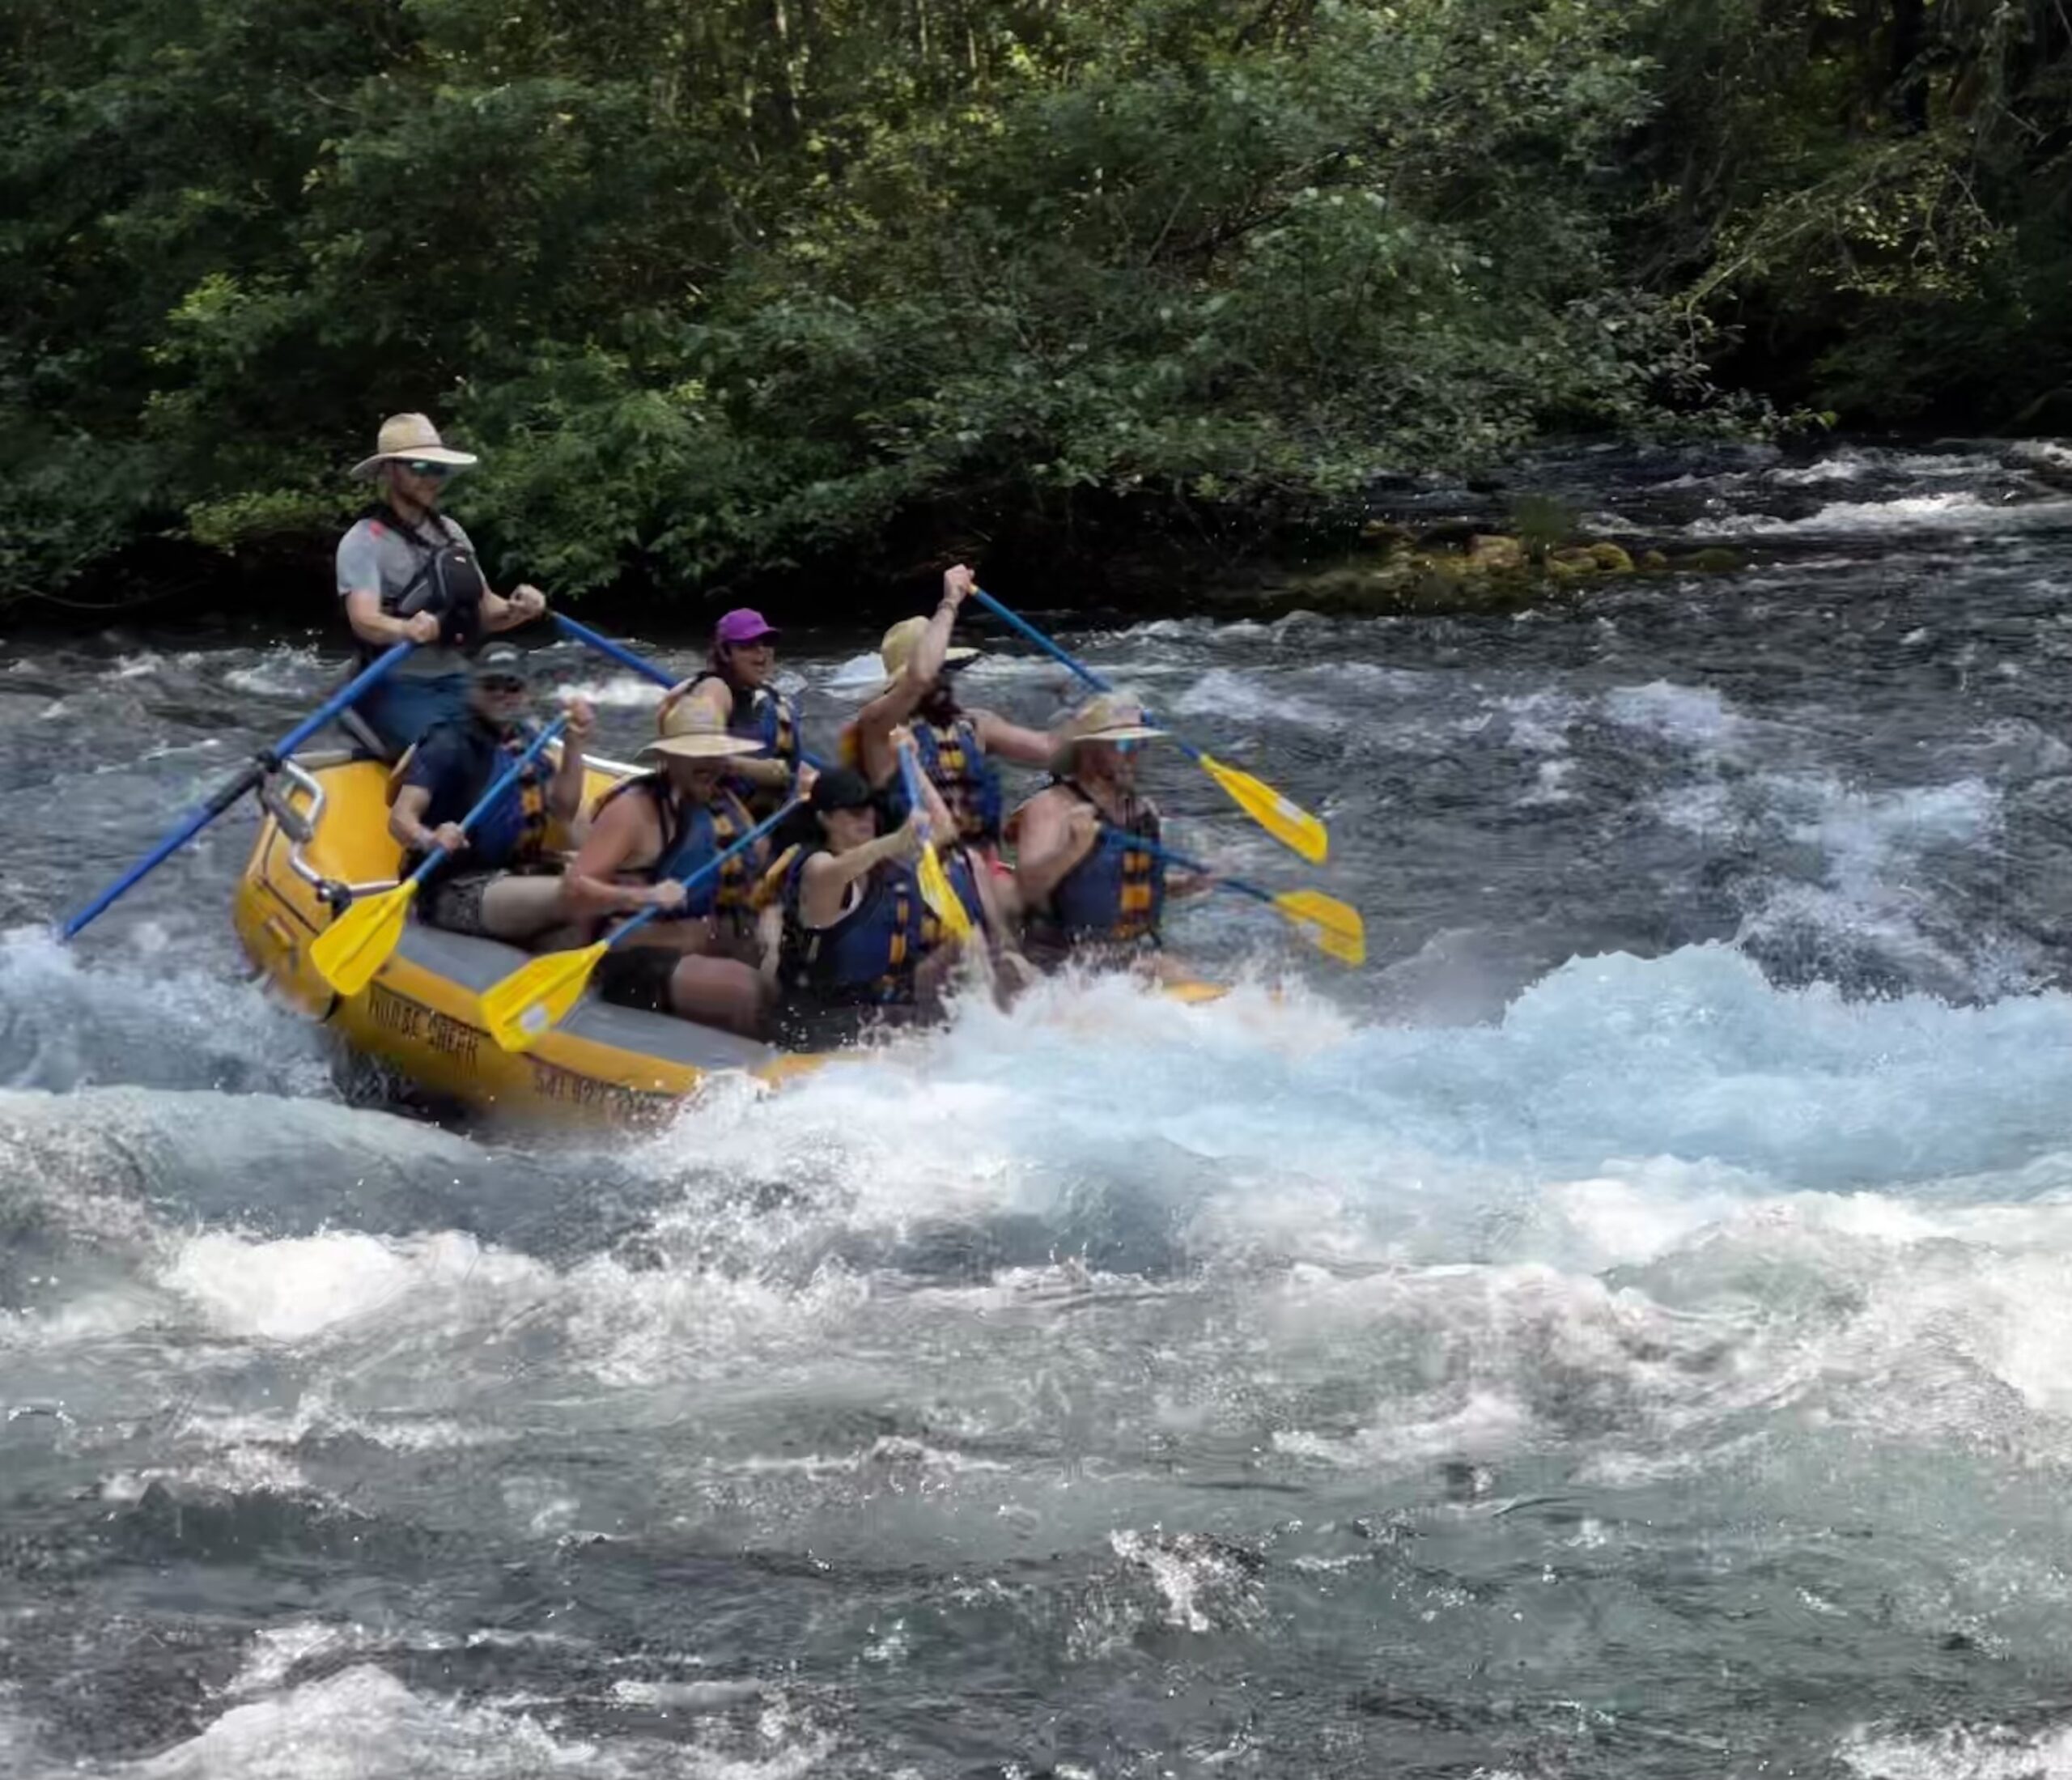 McKenzie River Rafting- perfect adventure for families and beginners!